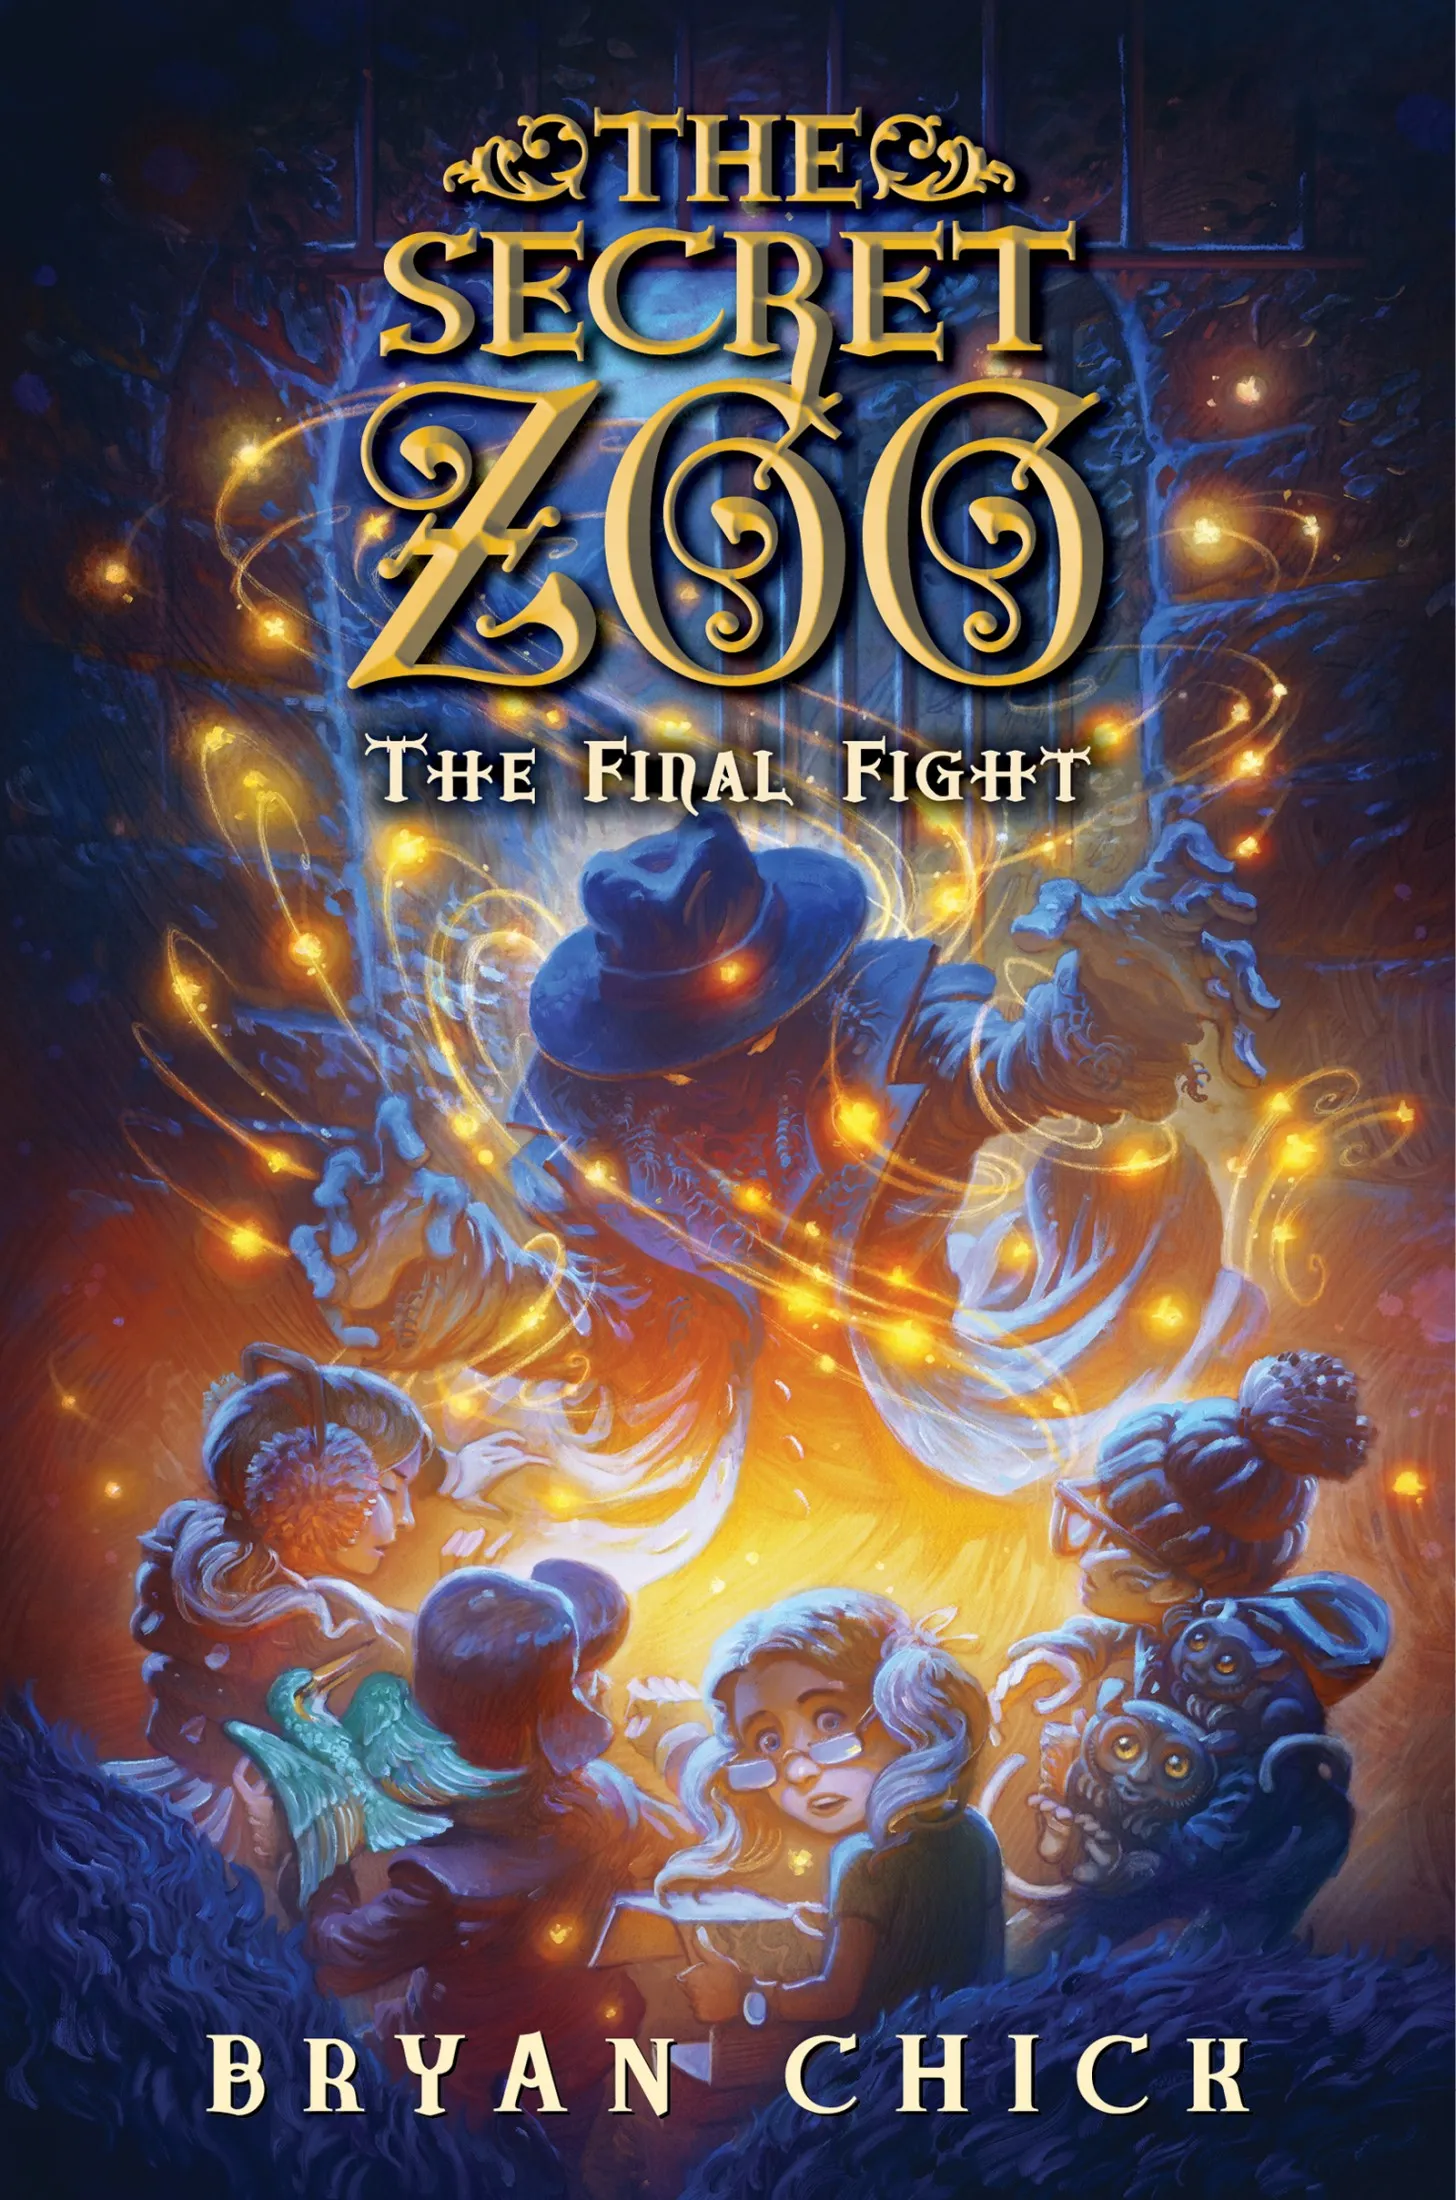 The Final Fight (The Secret Zoo #6)